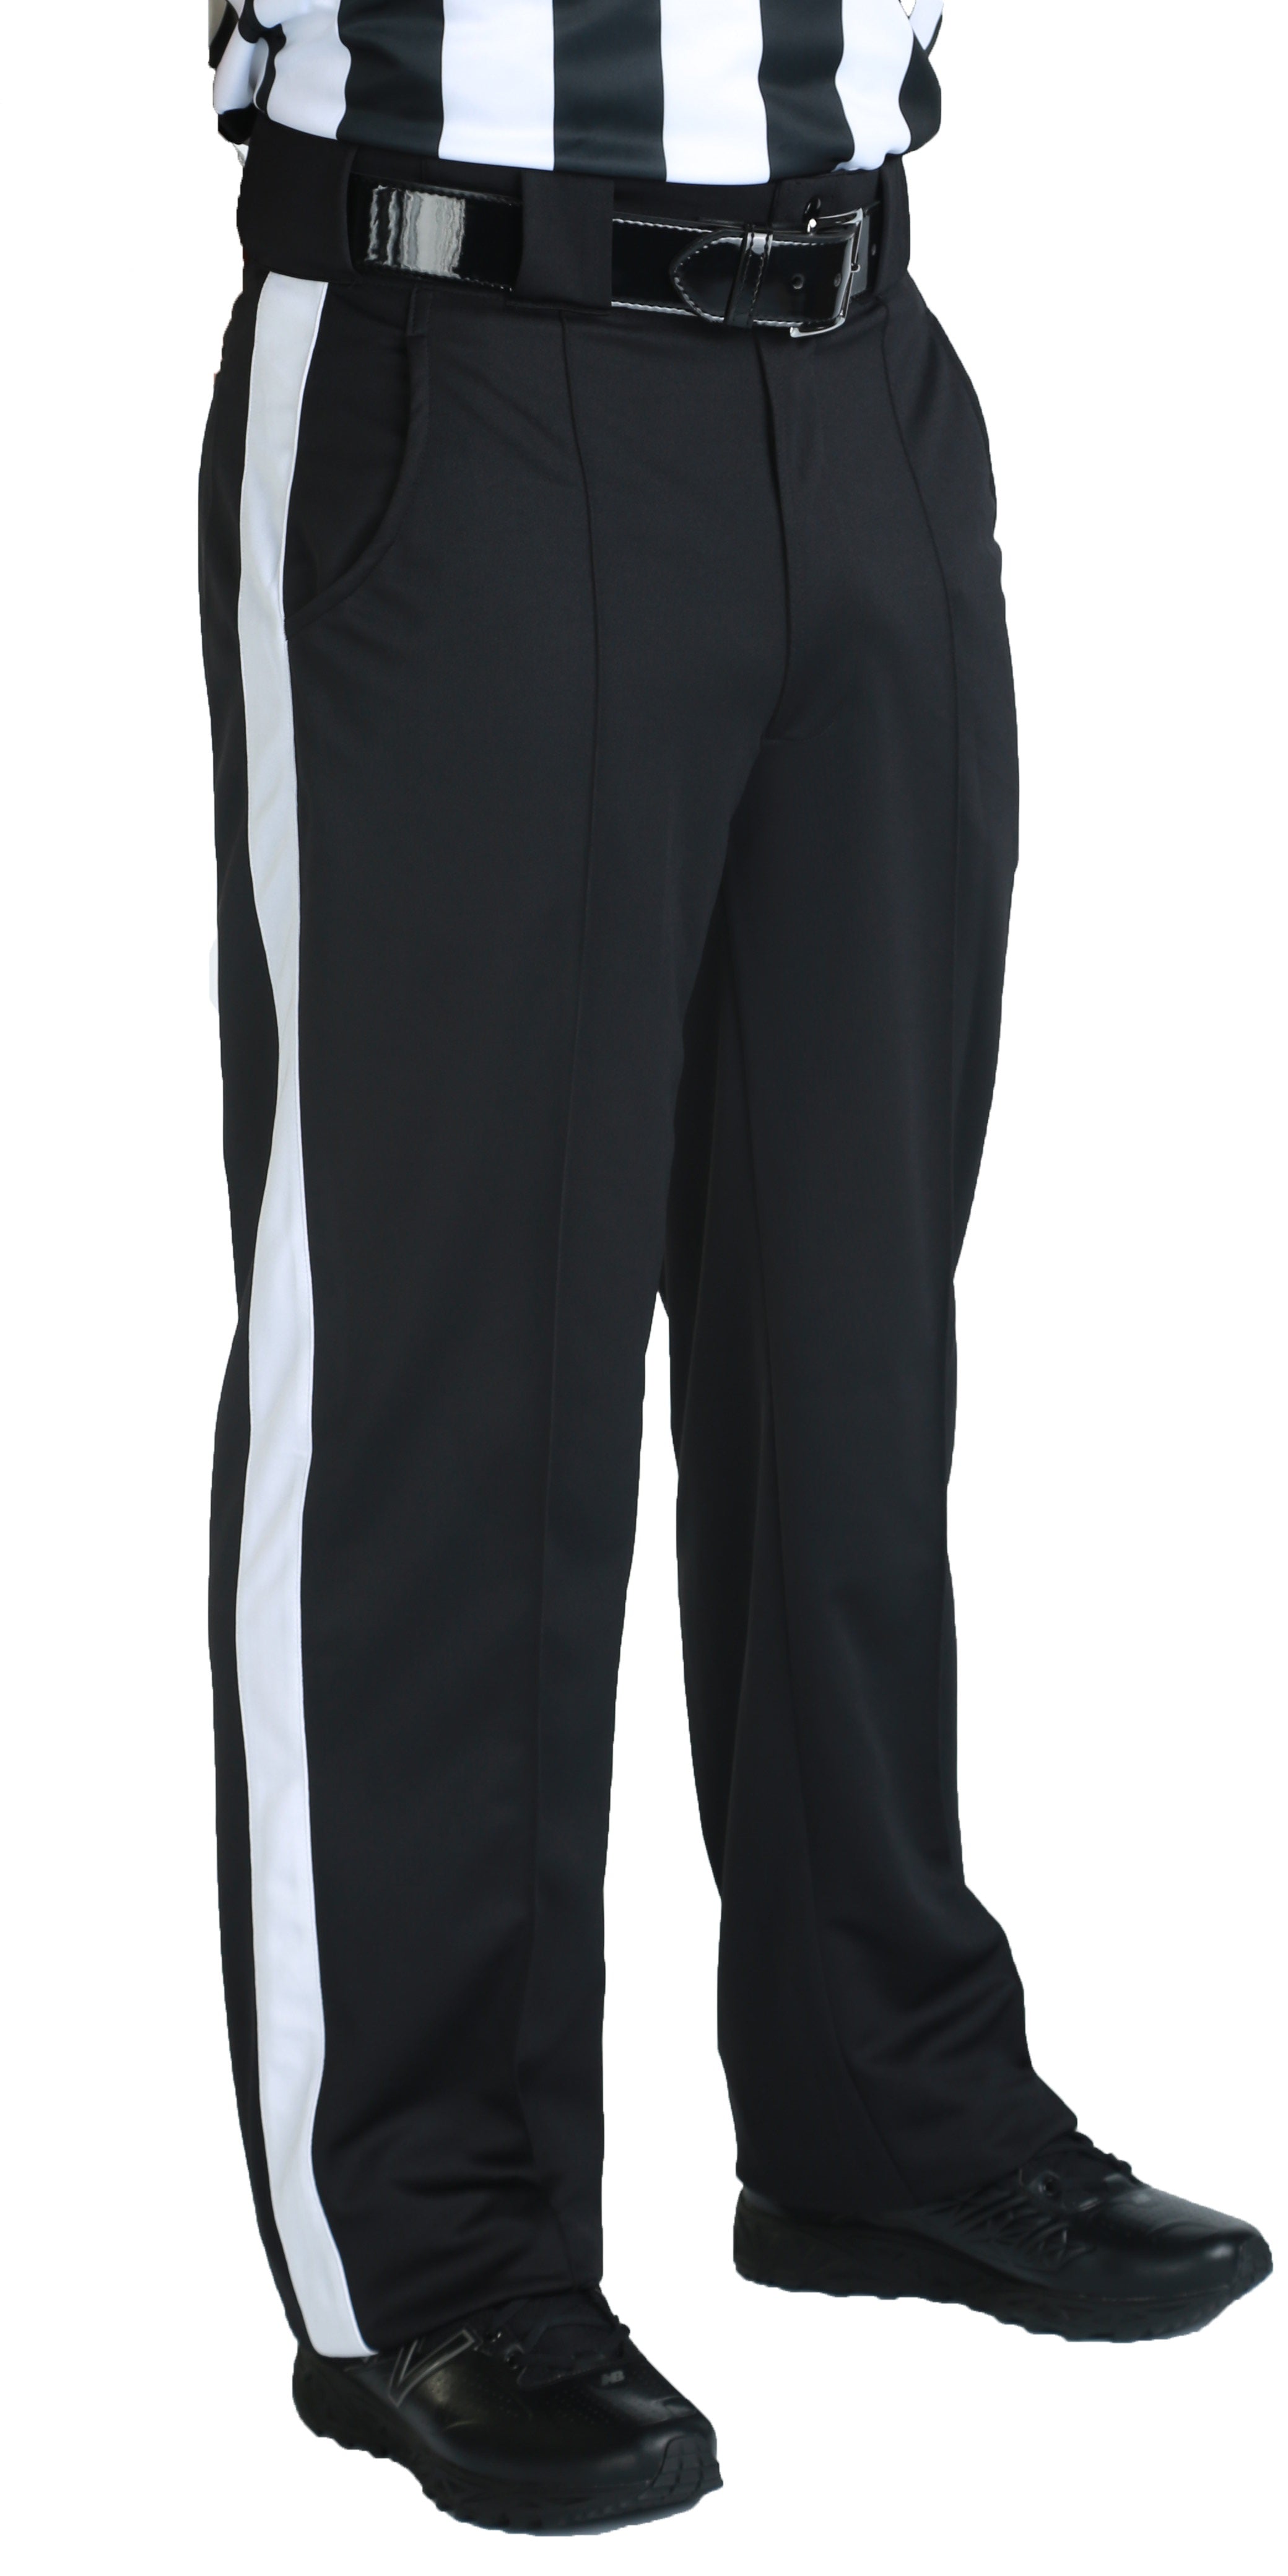 Amazoncom Smitty  FBS185  Warm Weather Football Referee Pants  New  Tapered Fit  1 14 White Stripe  Officials Choice 28  Sports   Outdoors